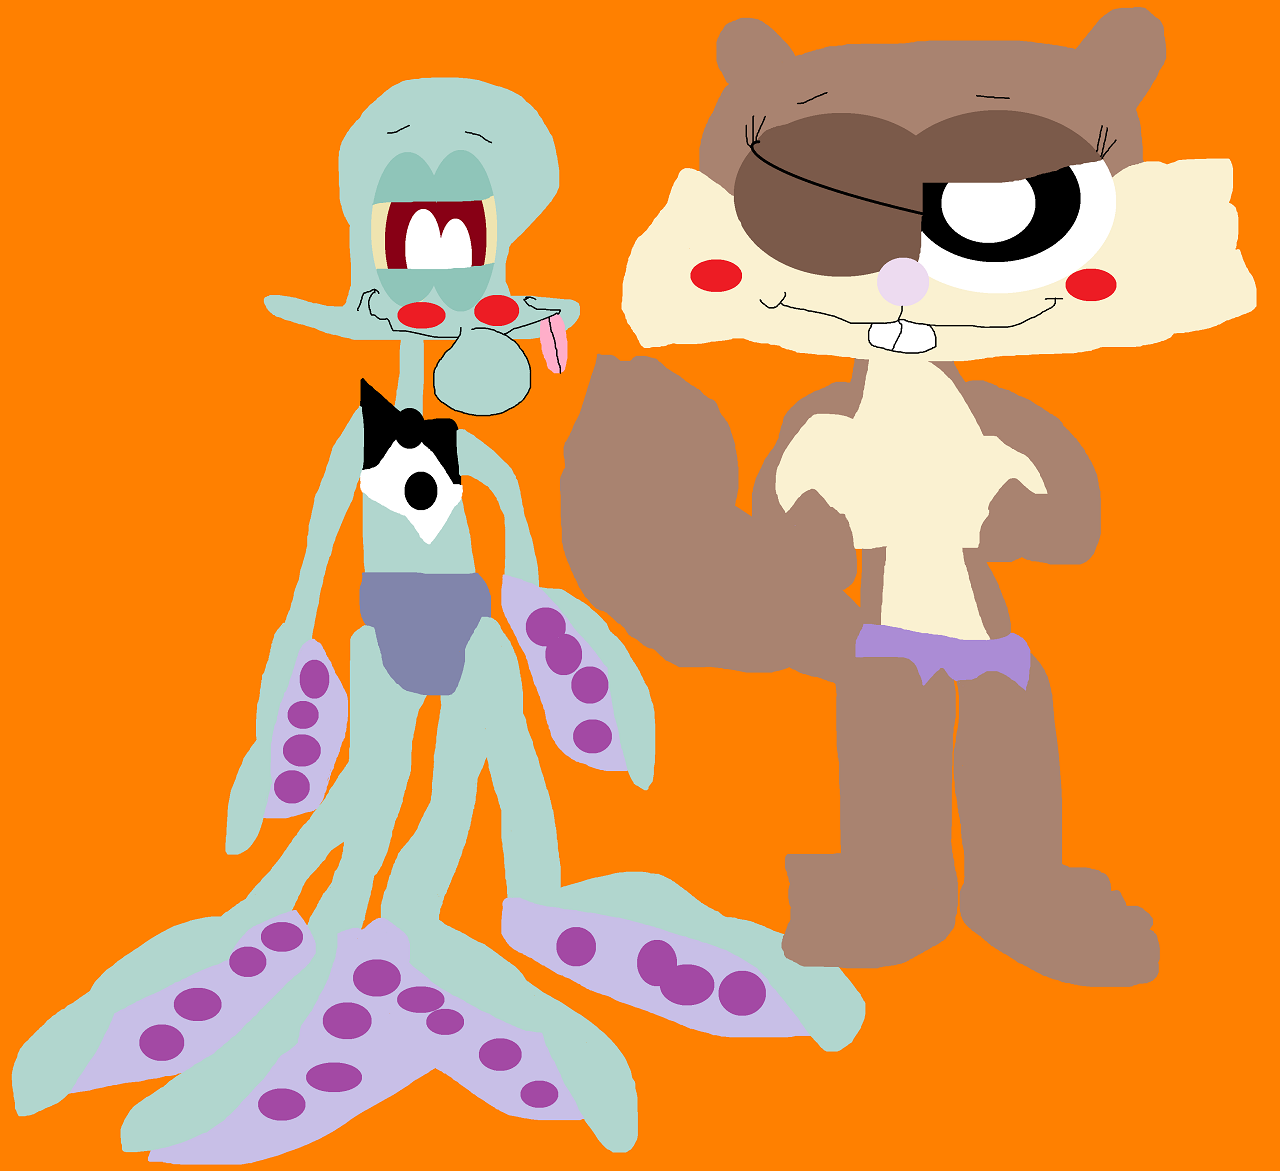 Sandy Winking At Squidward Who's Wearing A Bowtie And Undies Alt by Falconlobo